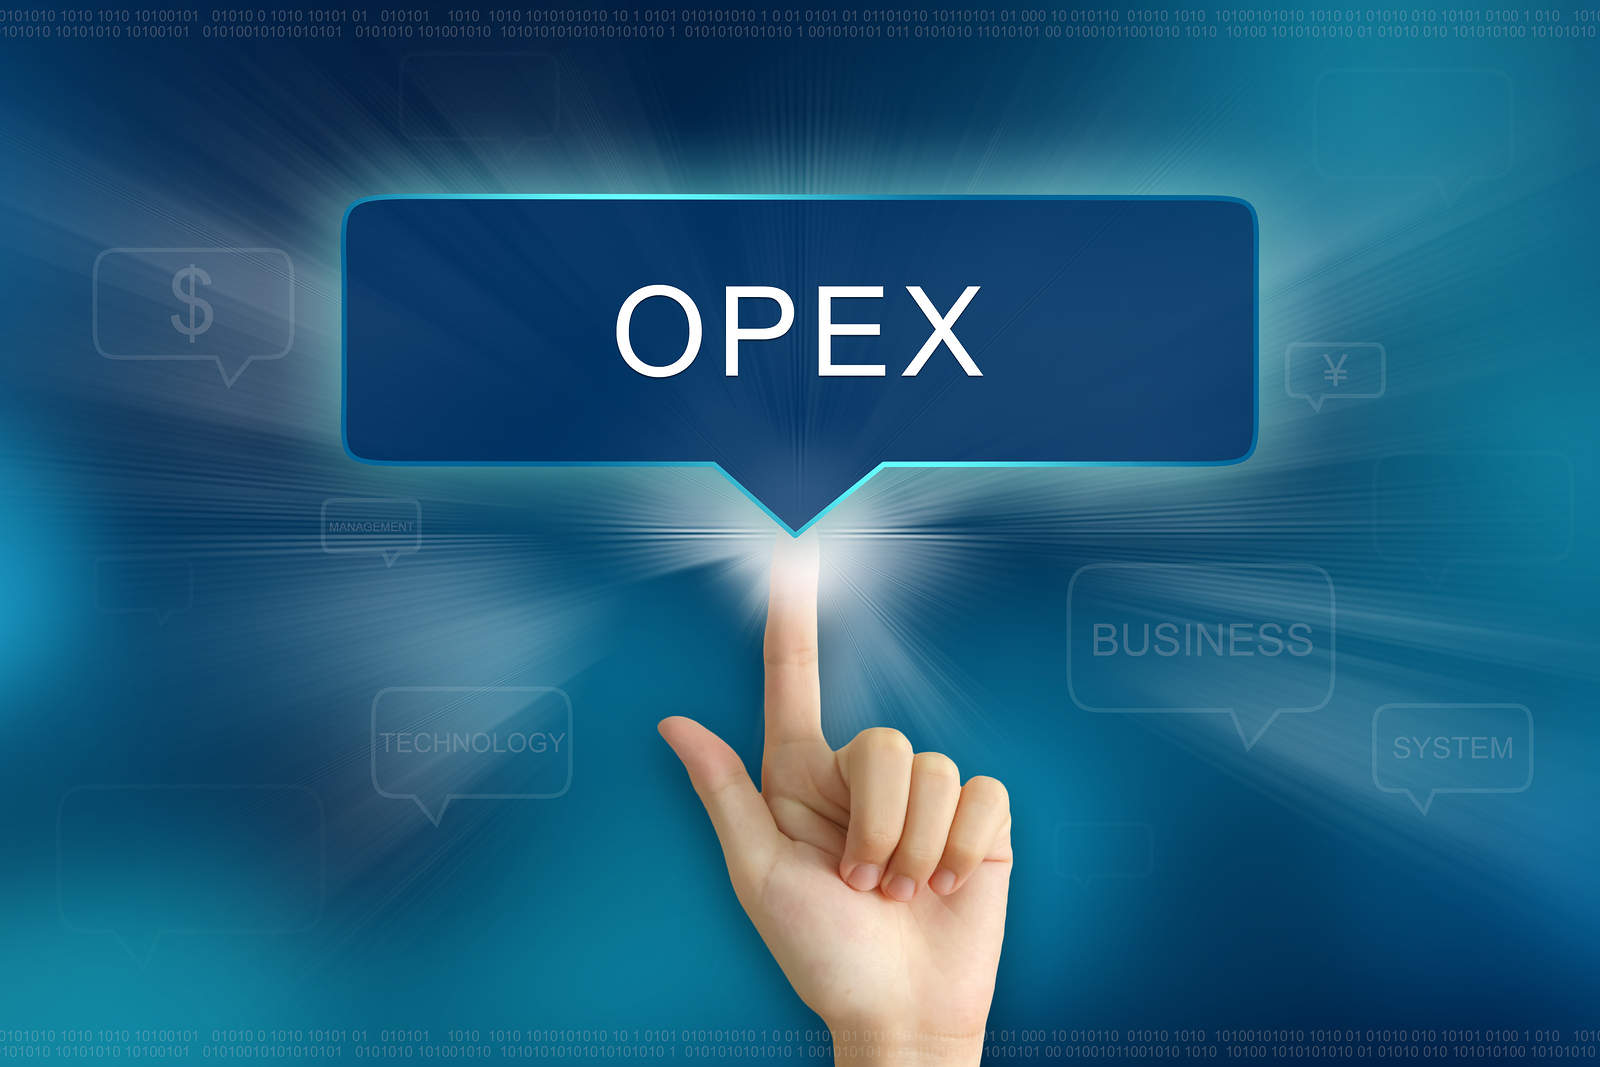 OpEx Spending for Private Cloud Storage: Shifting the Corporate Mindset